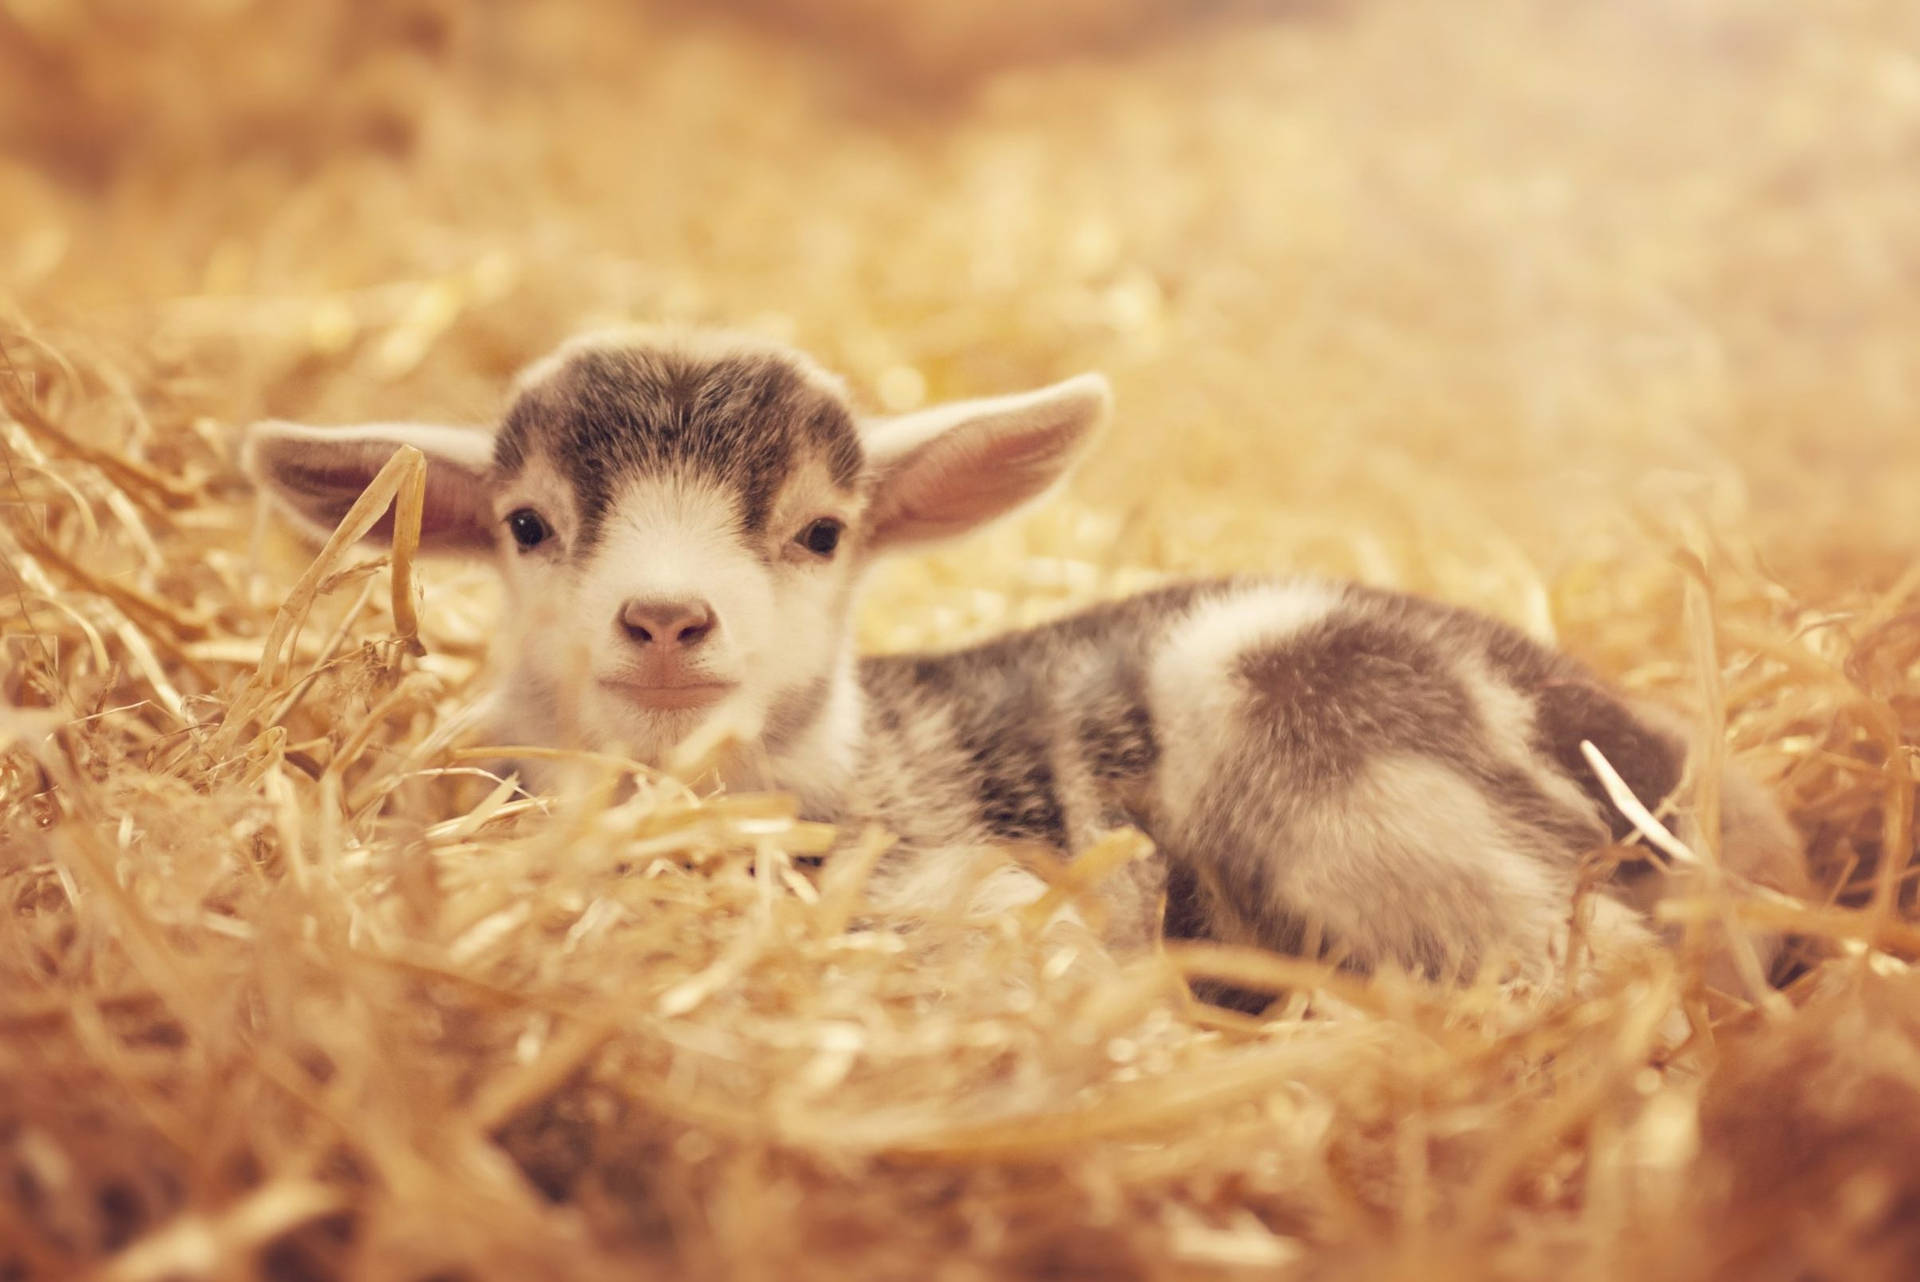 Cute Baby Goat Kid Looking At Camera Background